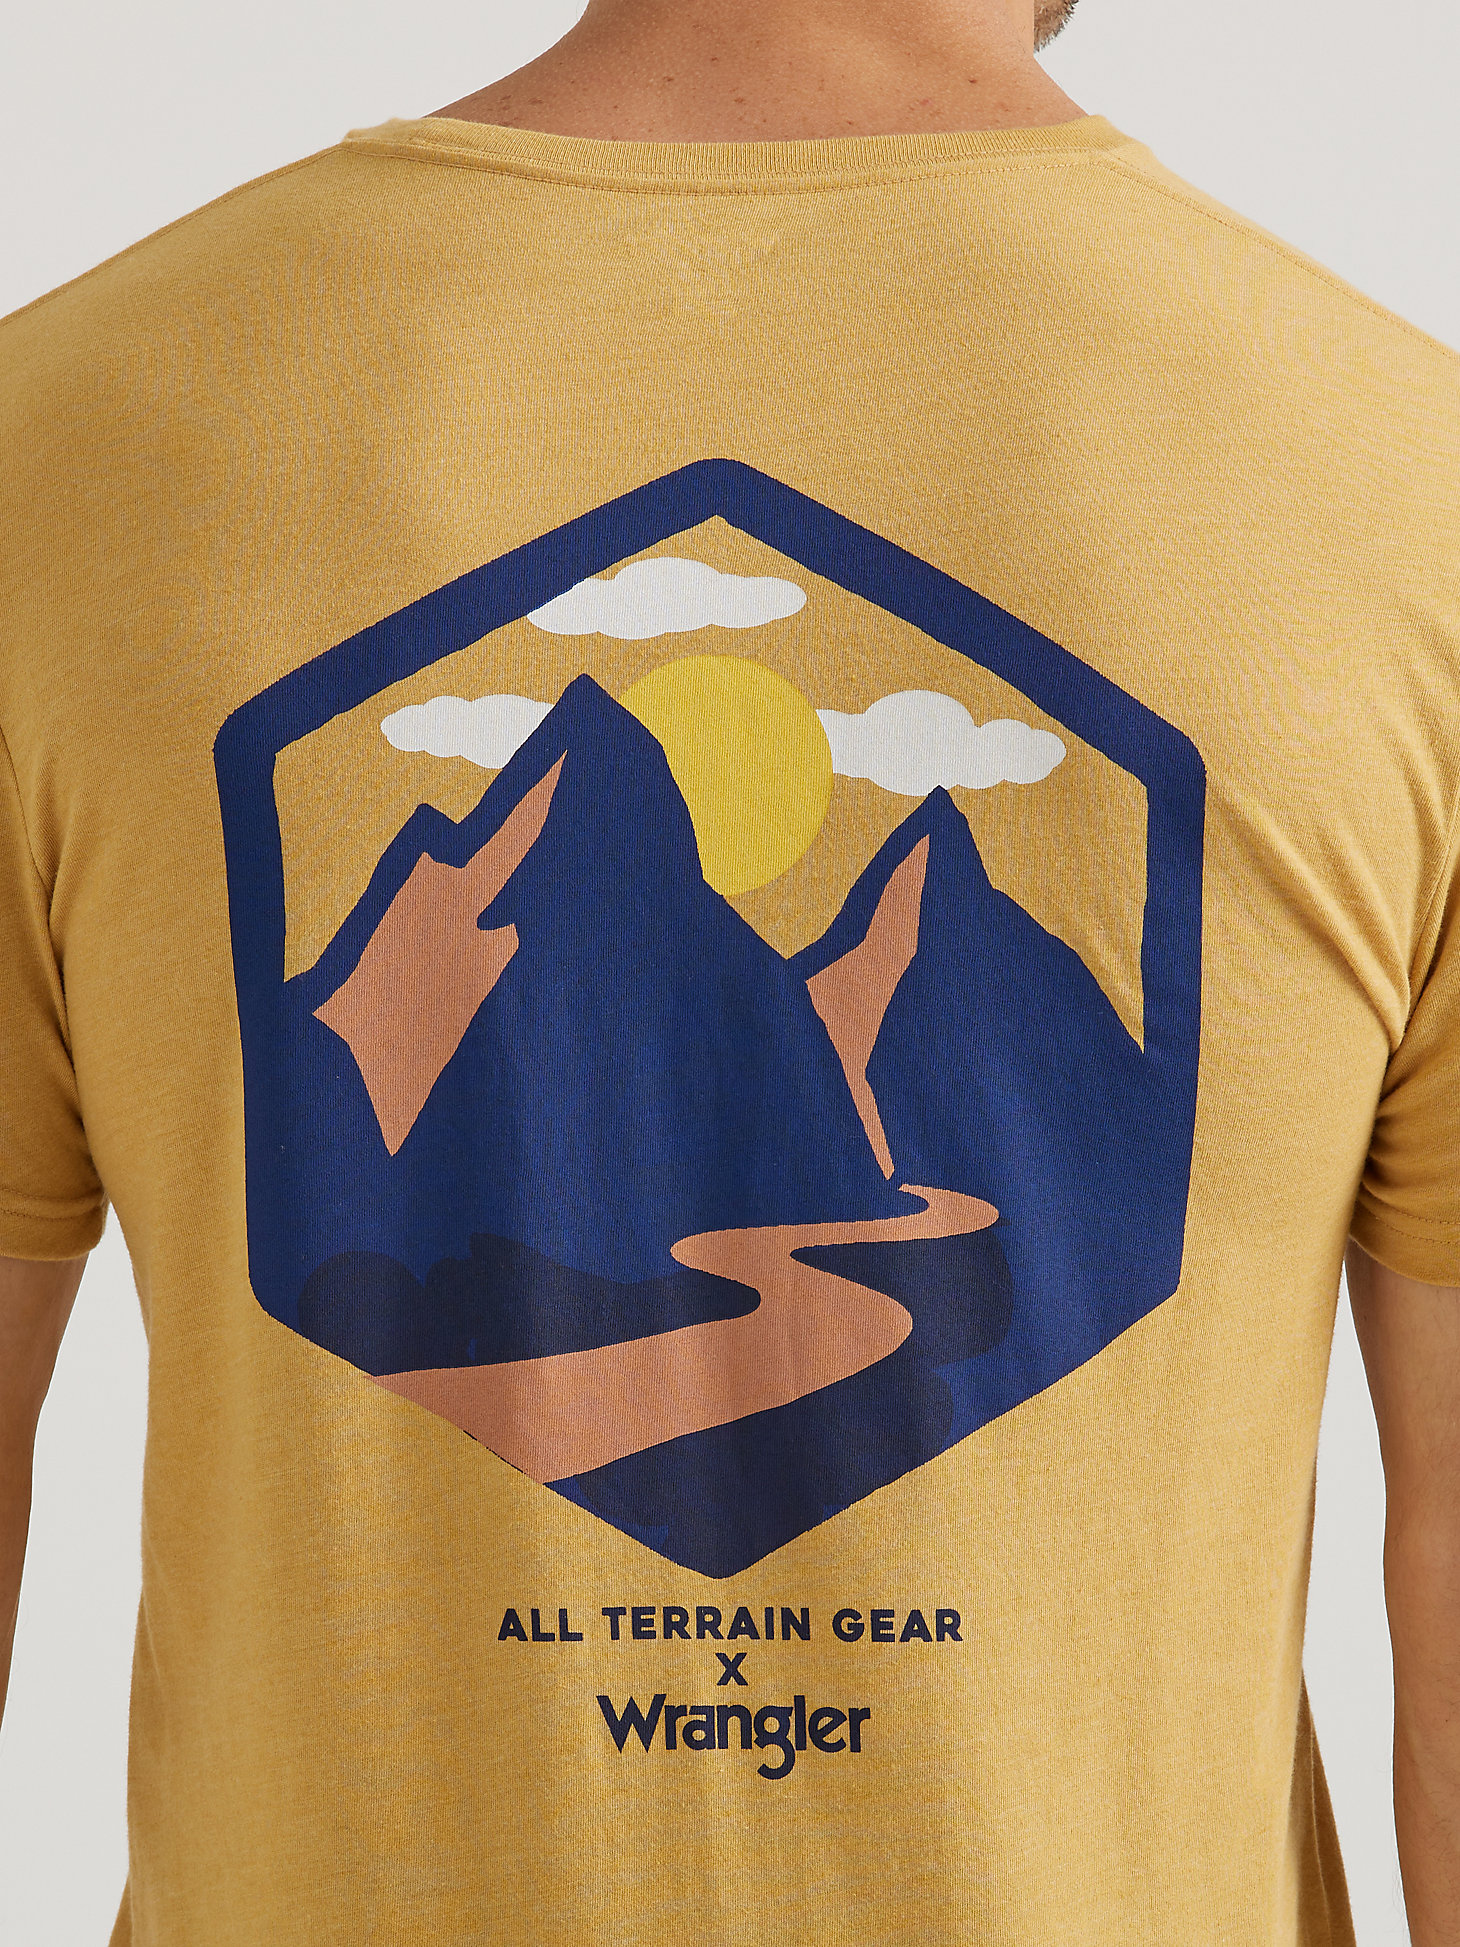 ATG By Wrangler® Men's Mountain Path T-Shirt in Pale Gold alternative view 2